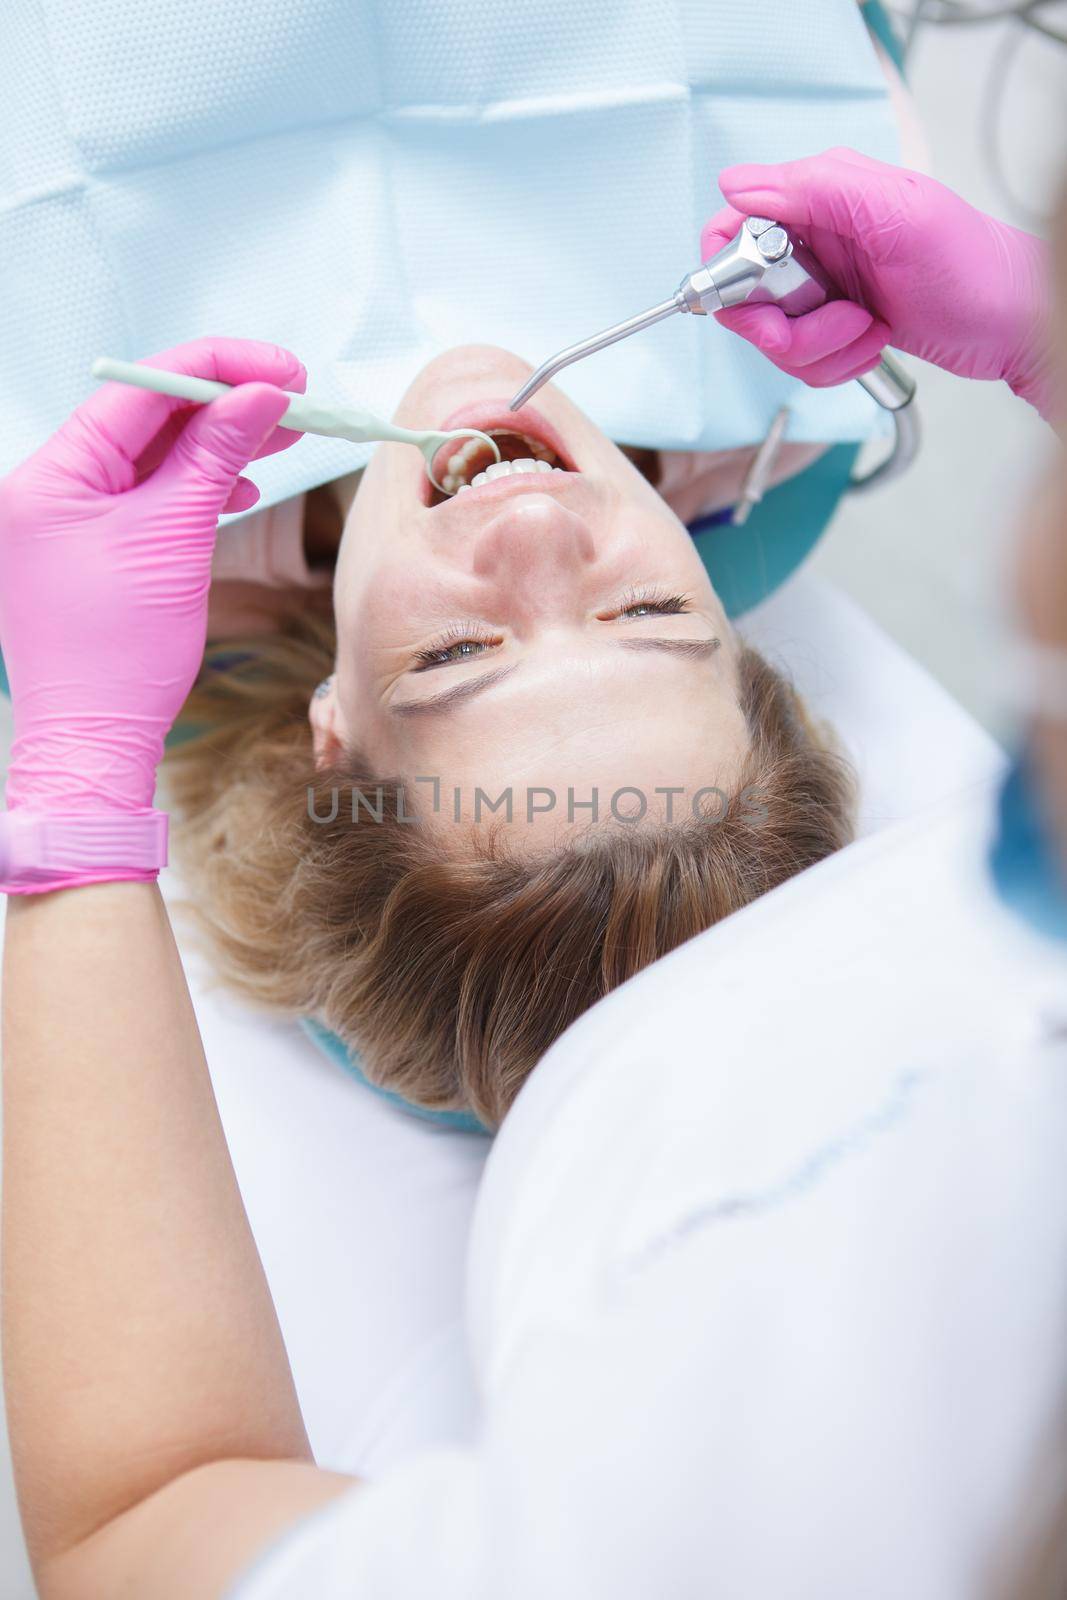 Vertical top view shot of a mature woman getting dental treatment by professional dentist